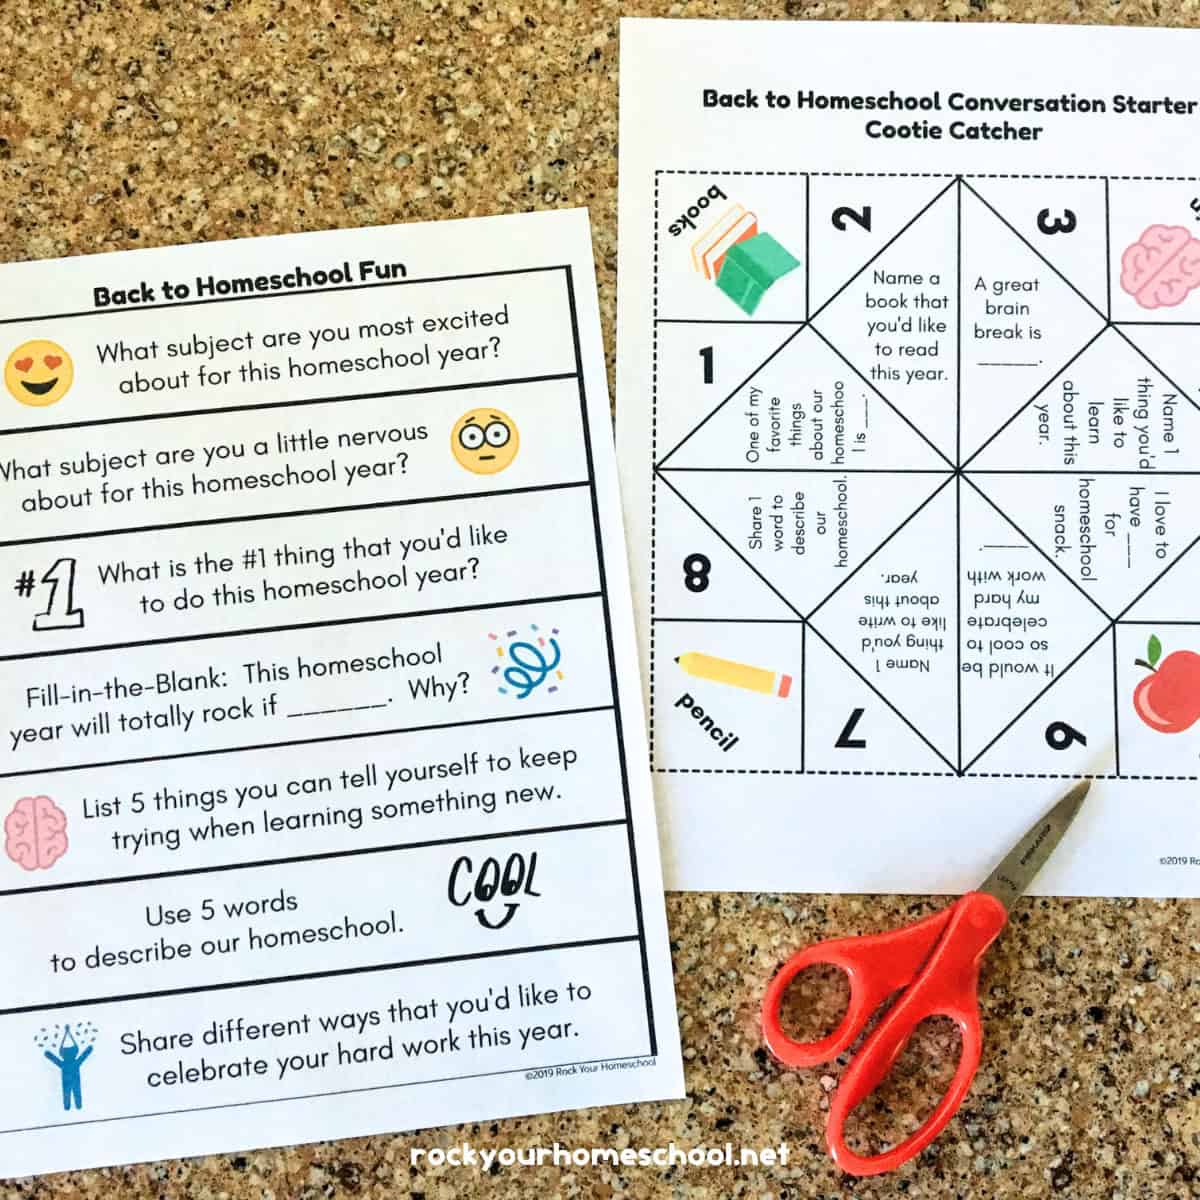 Two examples of printable back to homeschool conversation starters with prompts in paper strips and cootie catcher with scissors.